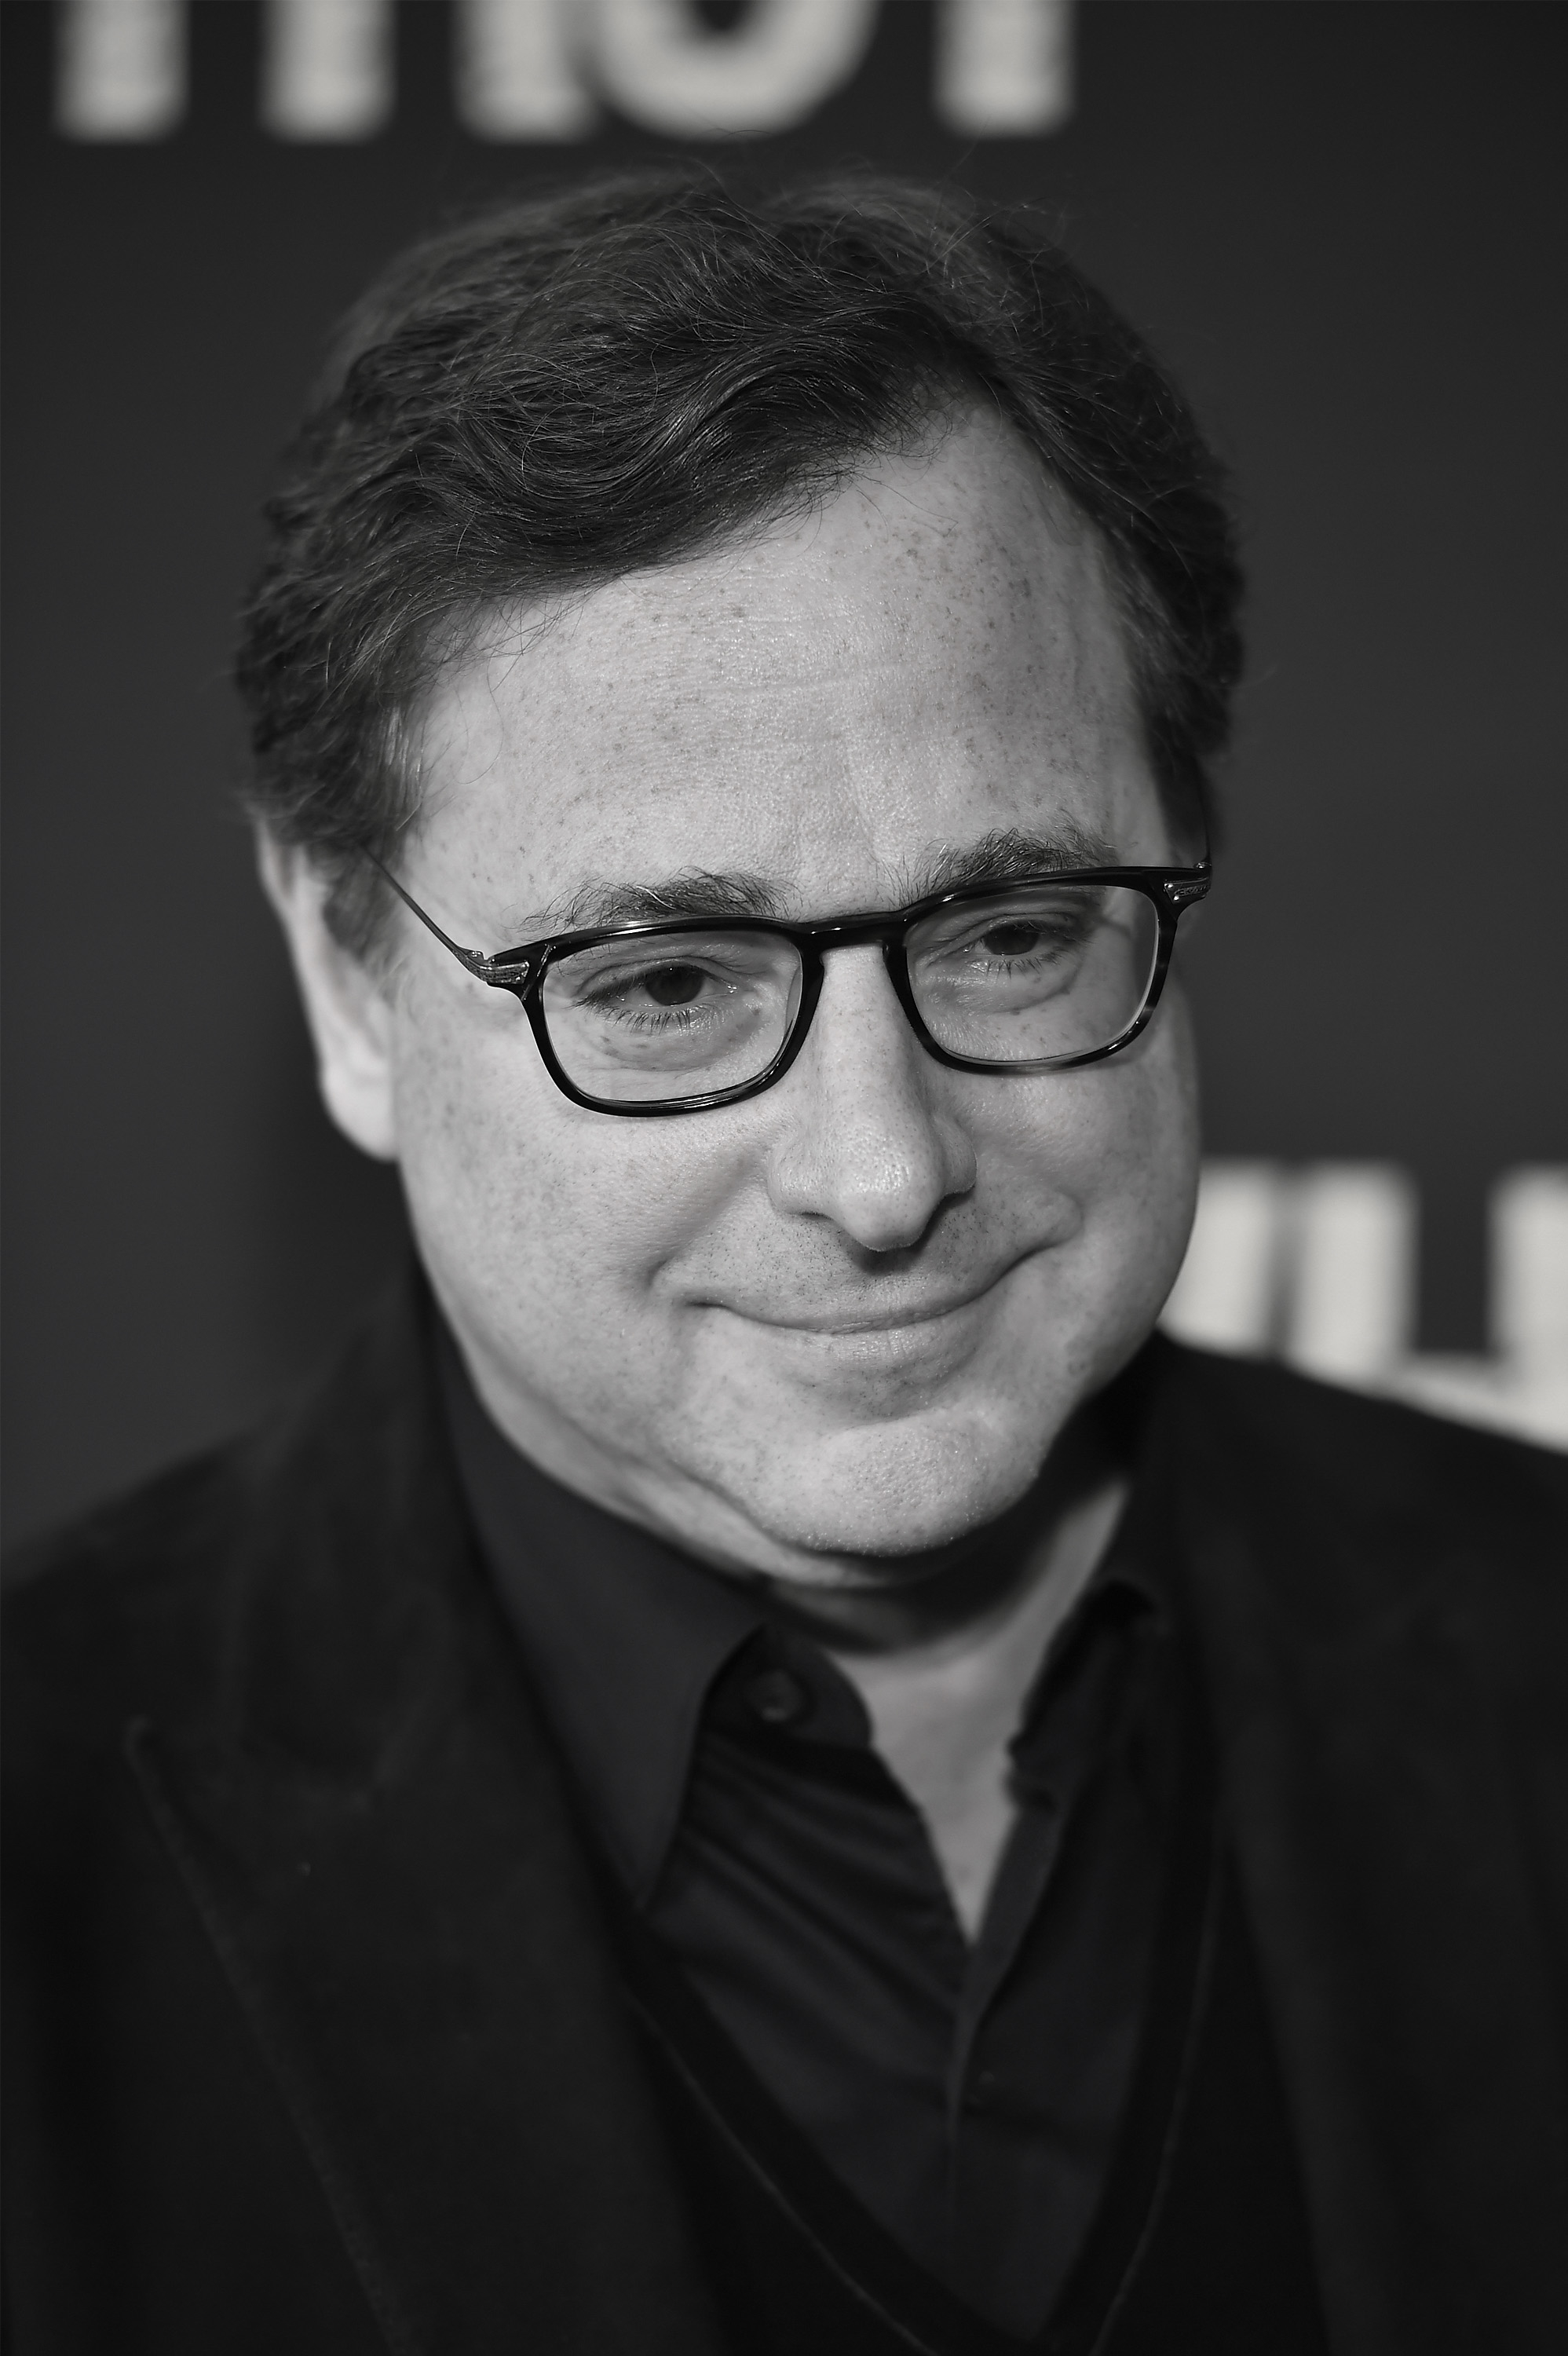 Bob Saget at a public event, wearing glasses and a suit with an open-collared shirt